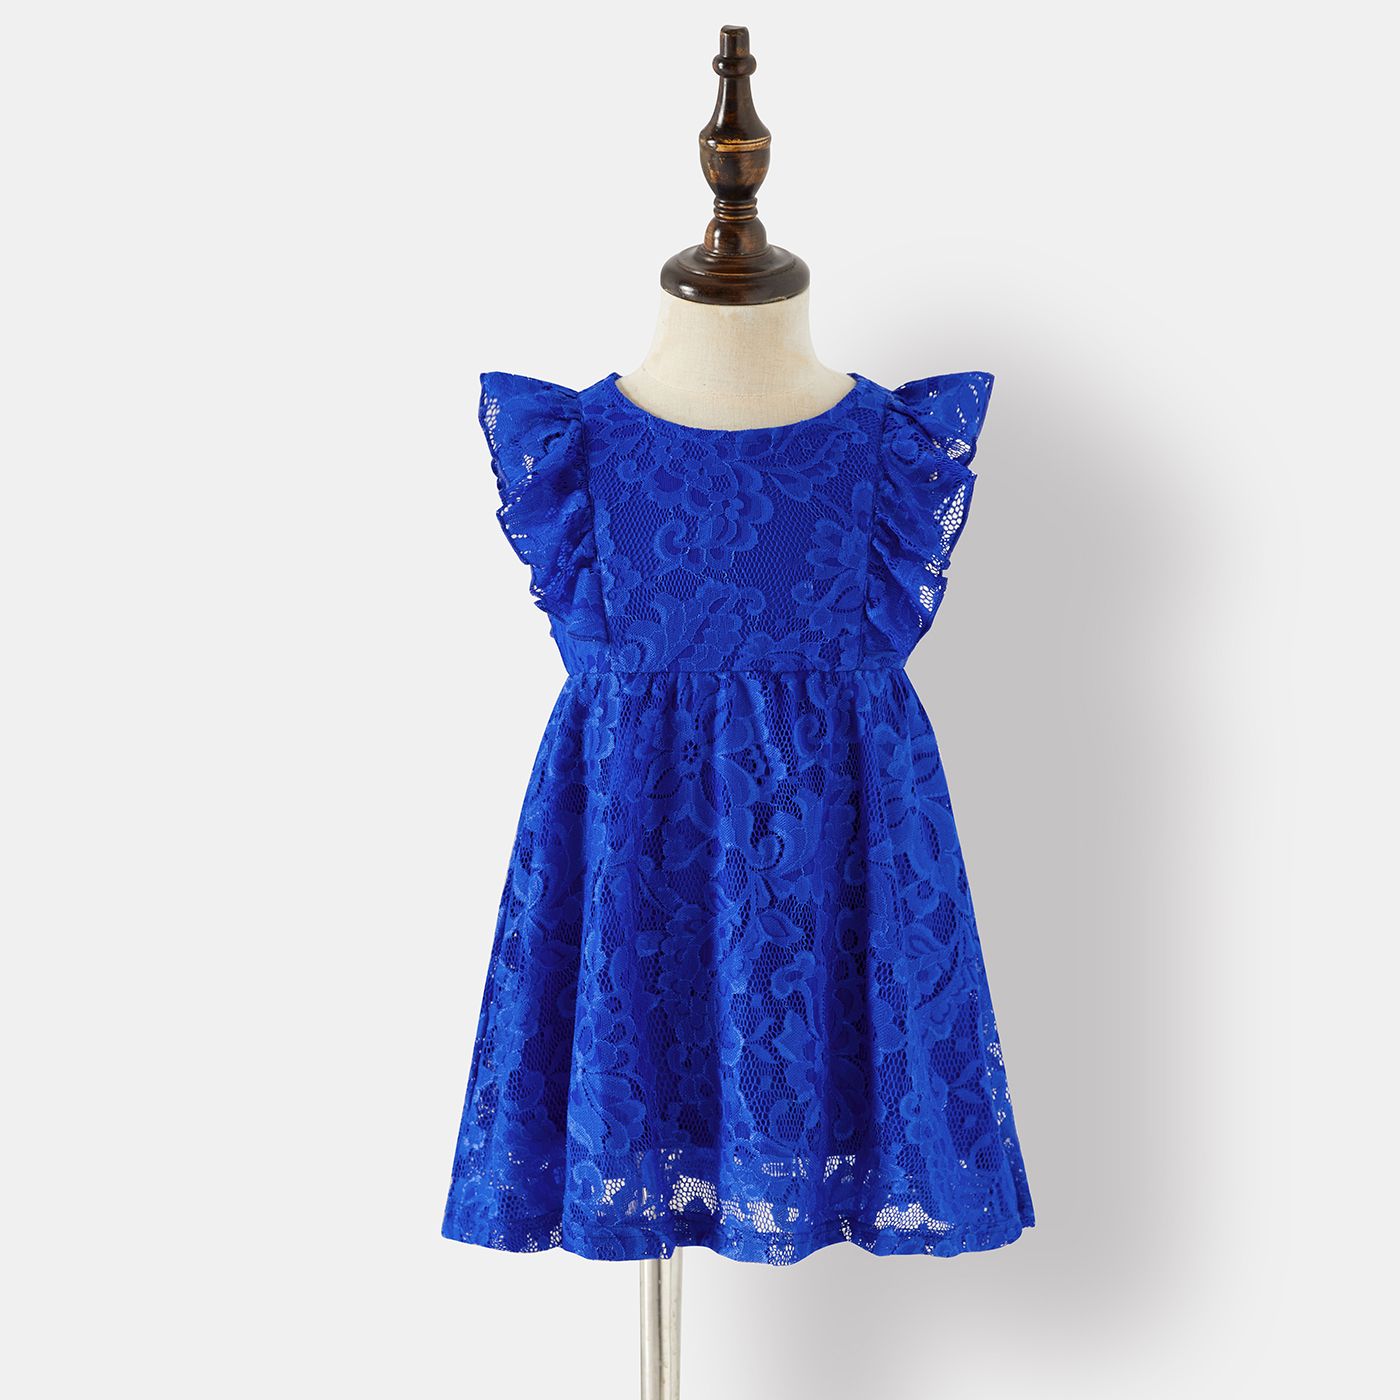 Family Matching Blue Lace Halter Sleeveless Dresses And Colorblock Short-sleeve Polo Shirts Sets